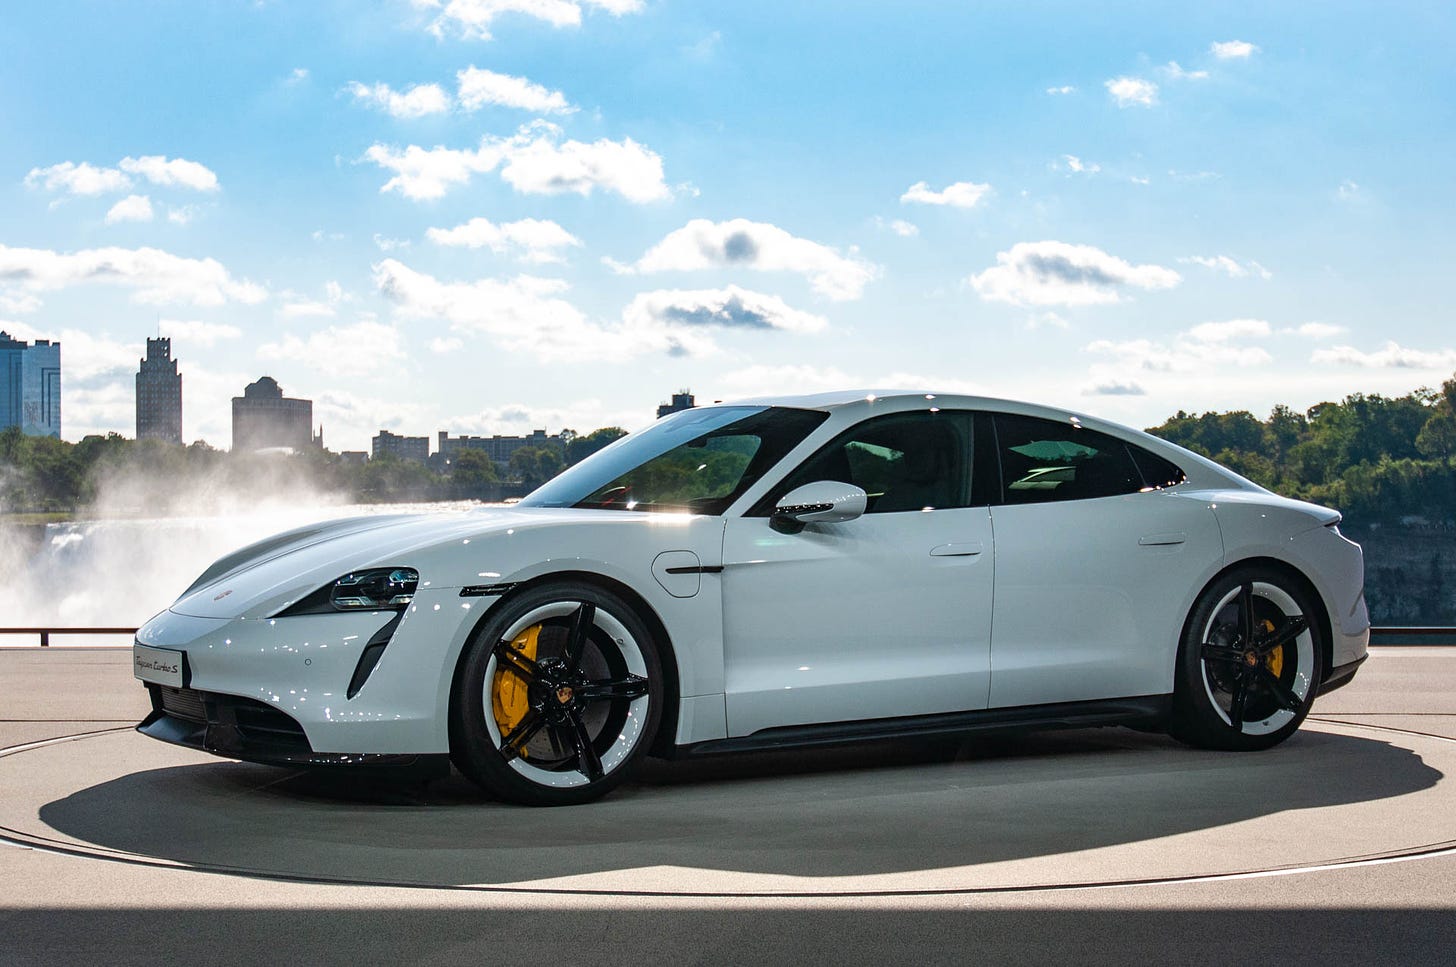 2020 Porsche Taycan preview: Electric car launches a gas-free future